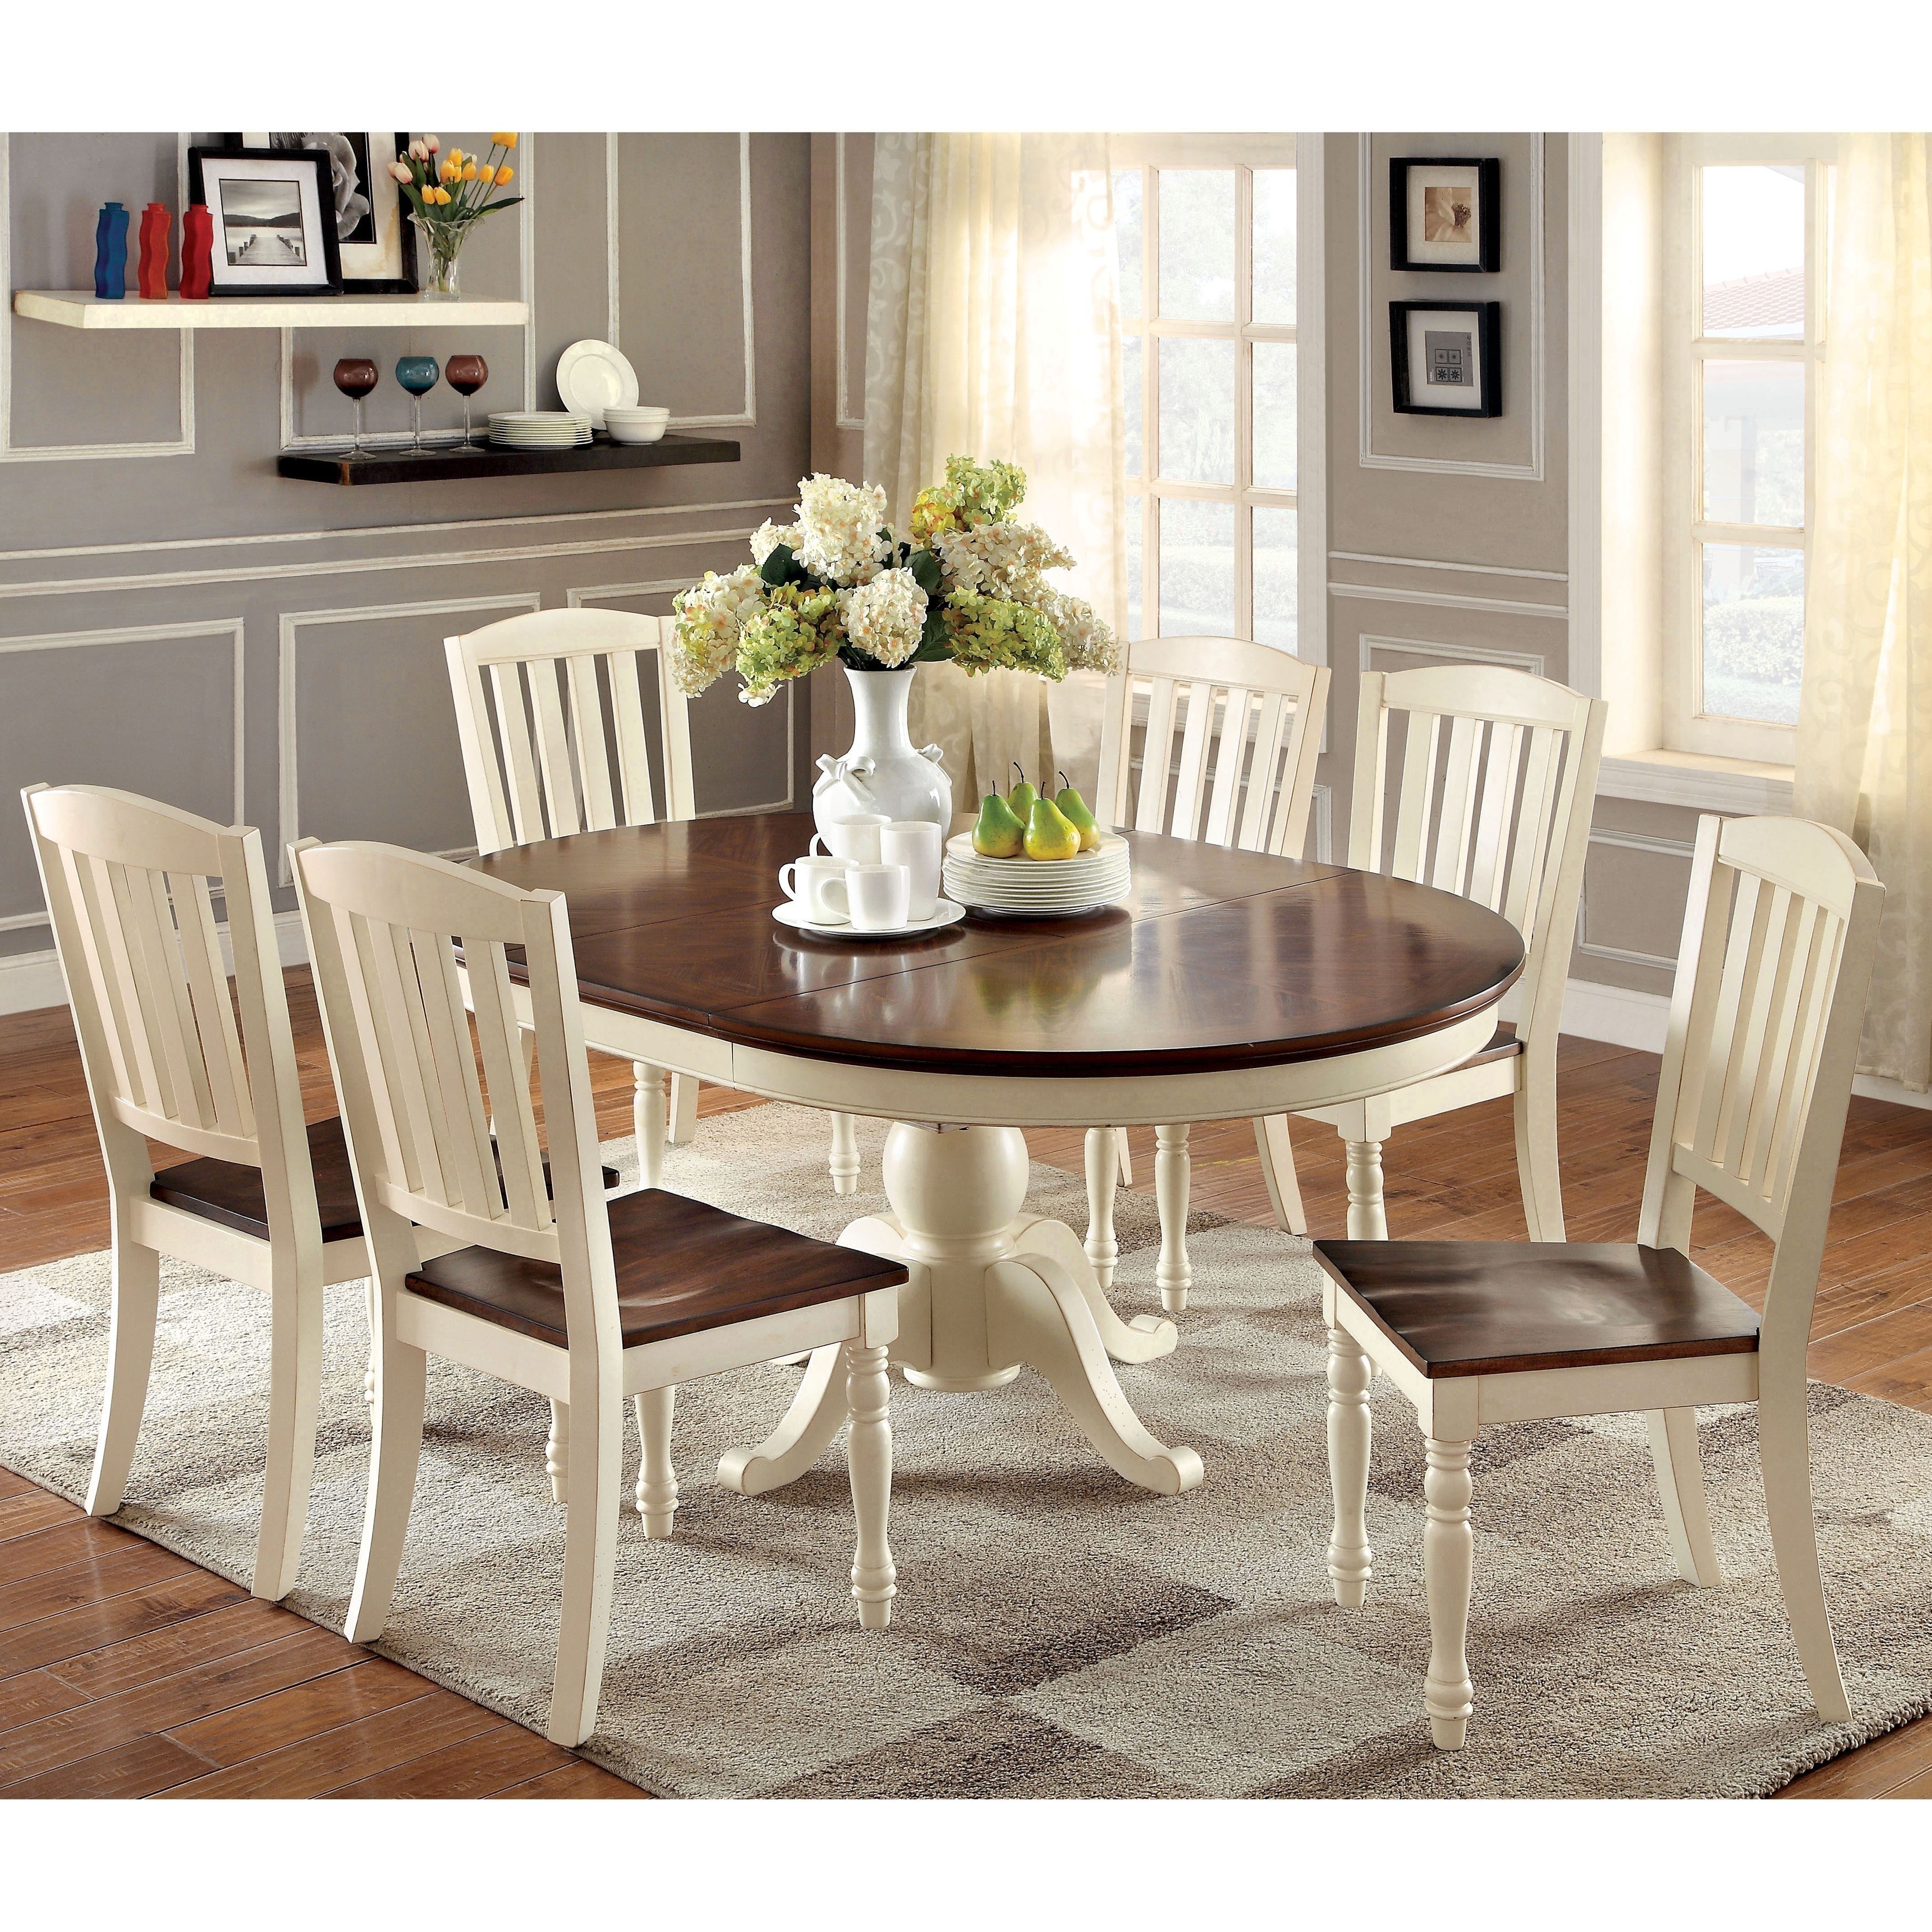 Furniture Of America Bethannie 7 Piece Cottage Style Oval Dining Set Regarding 2018 Kirsten 5 Piece Dining Sets (View 19 of 20)